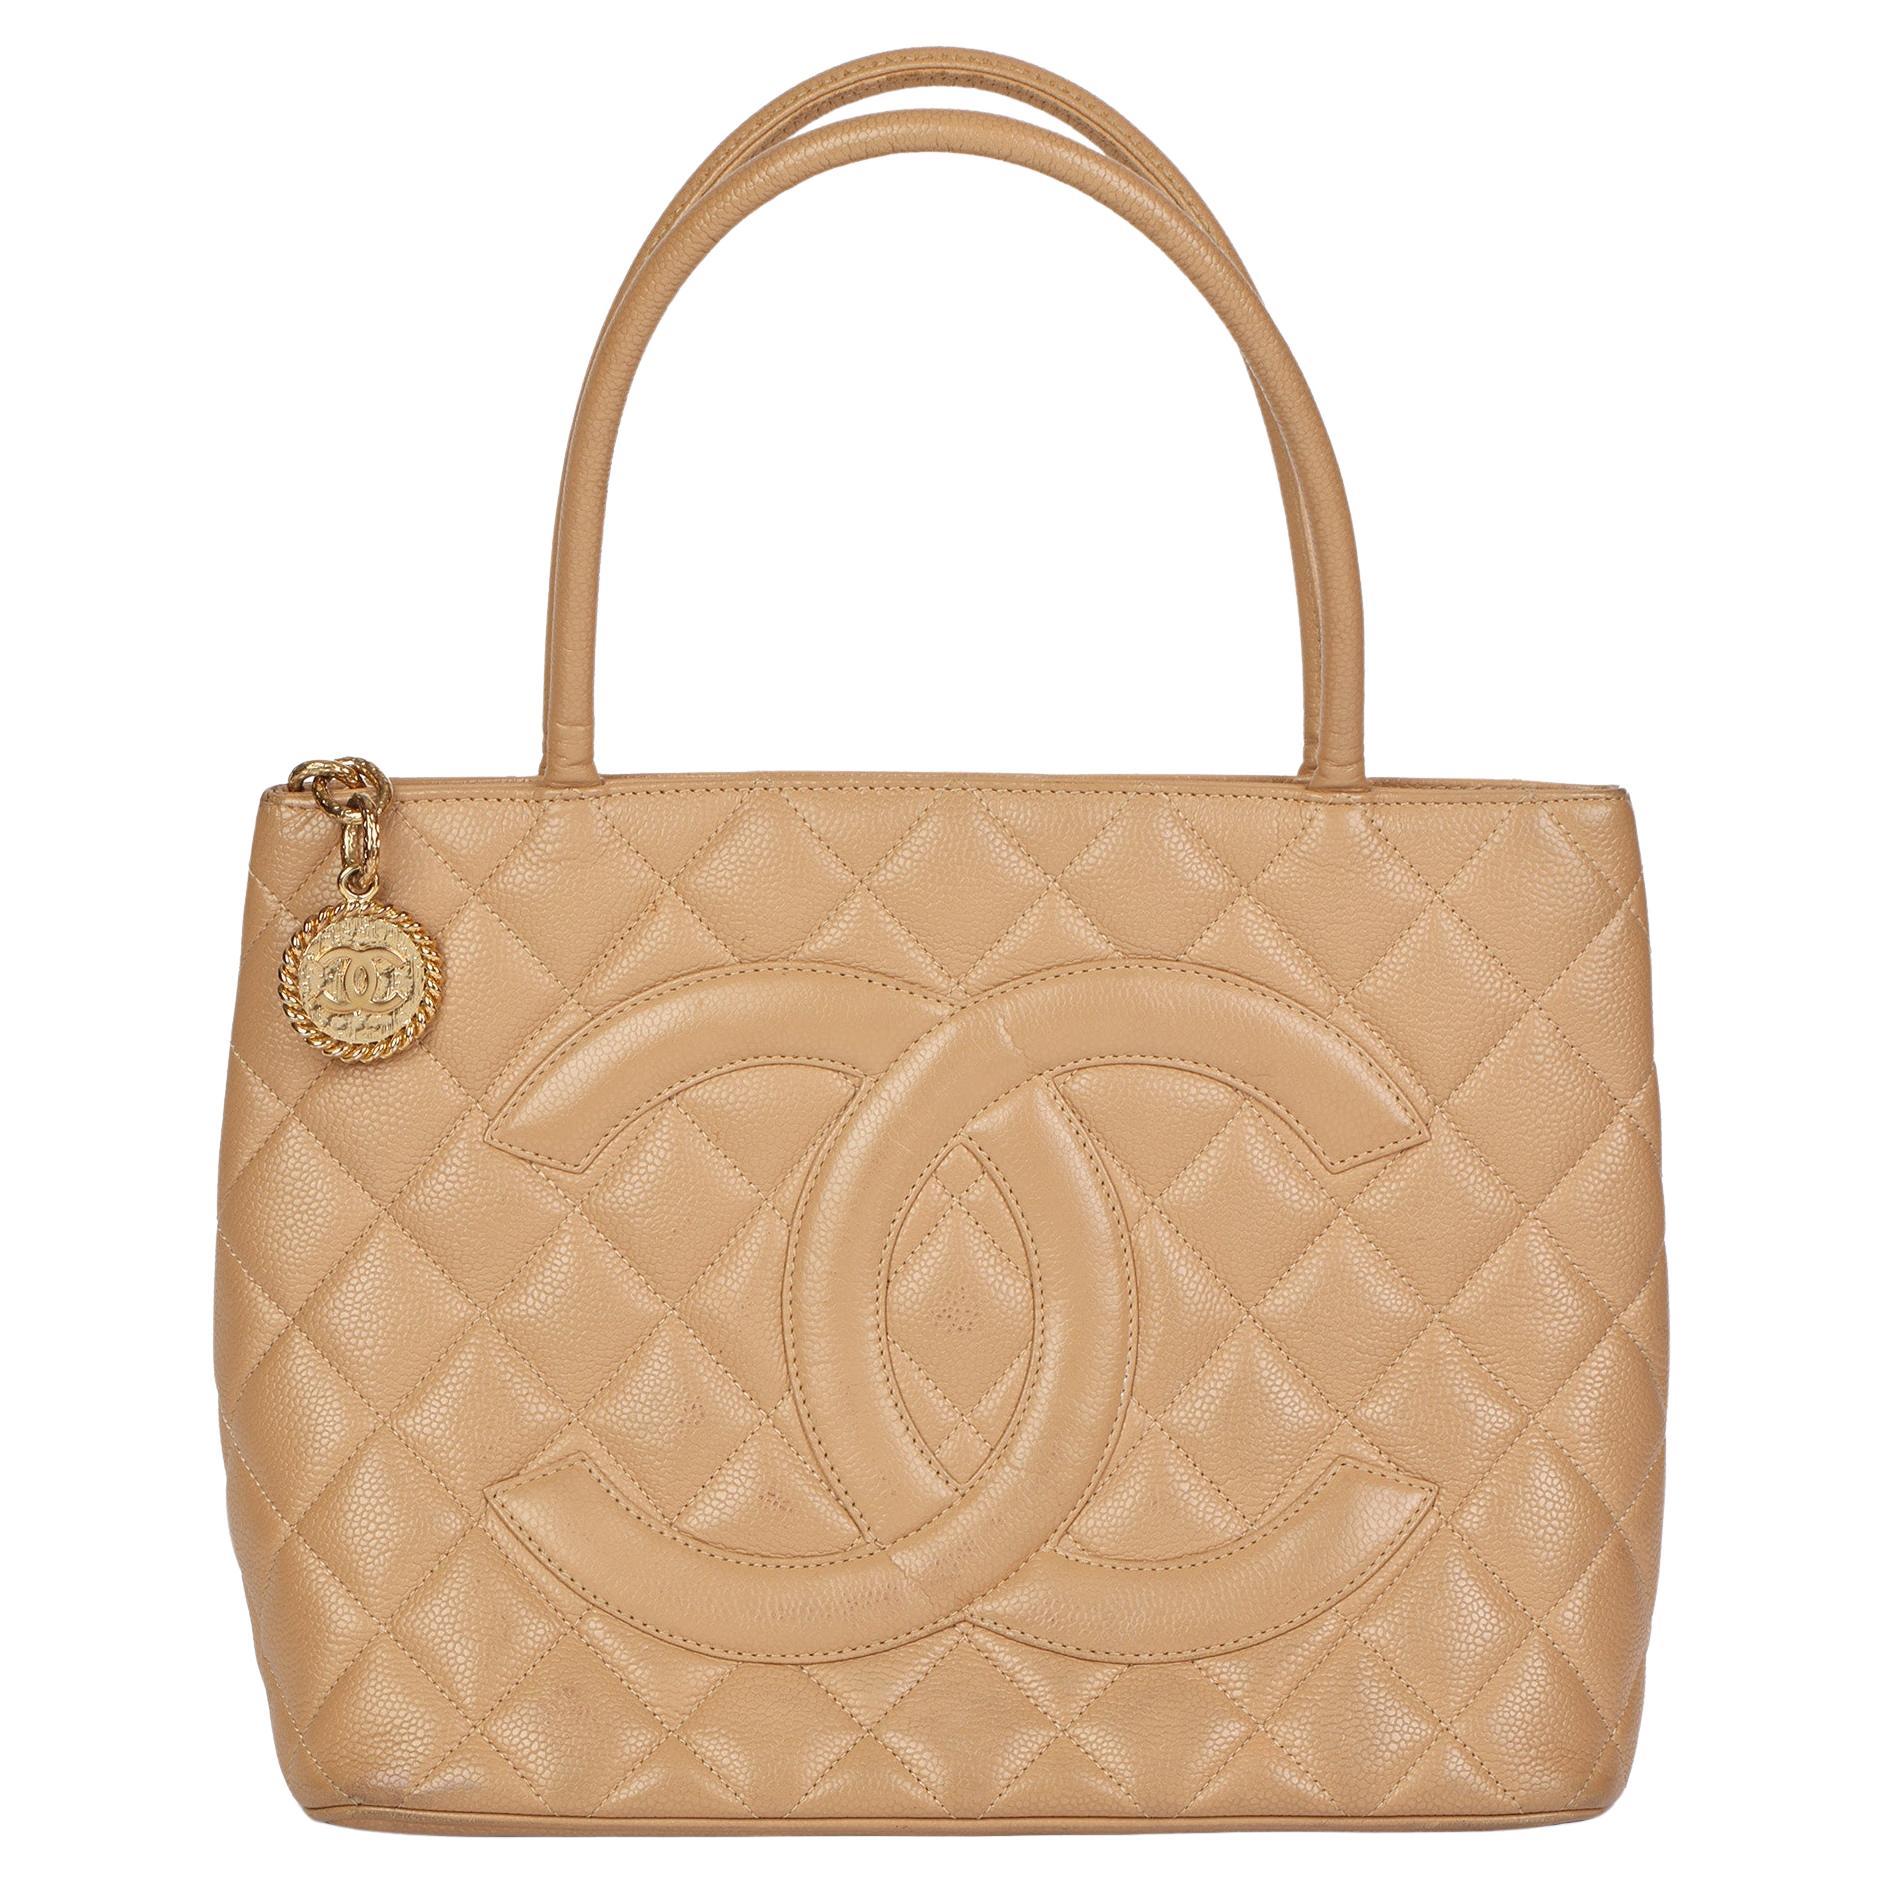 CHANEL Beige Caviar Leather Medallion Tote